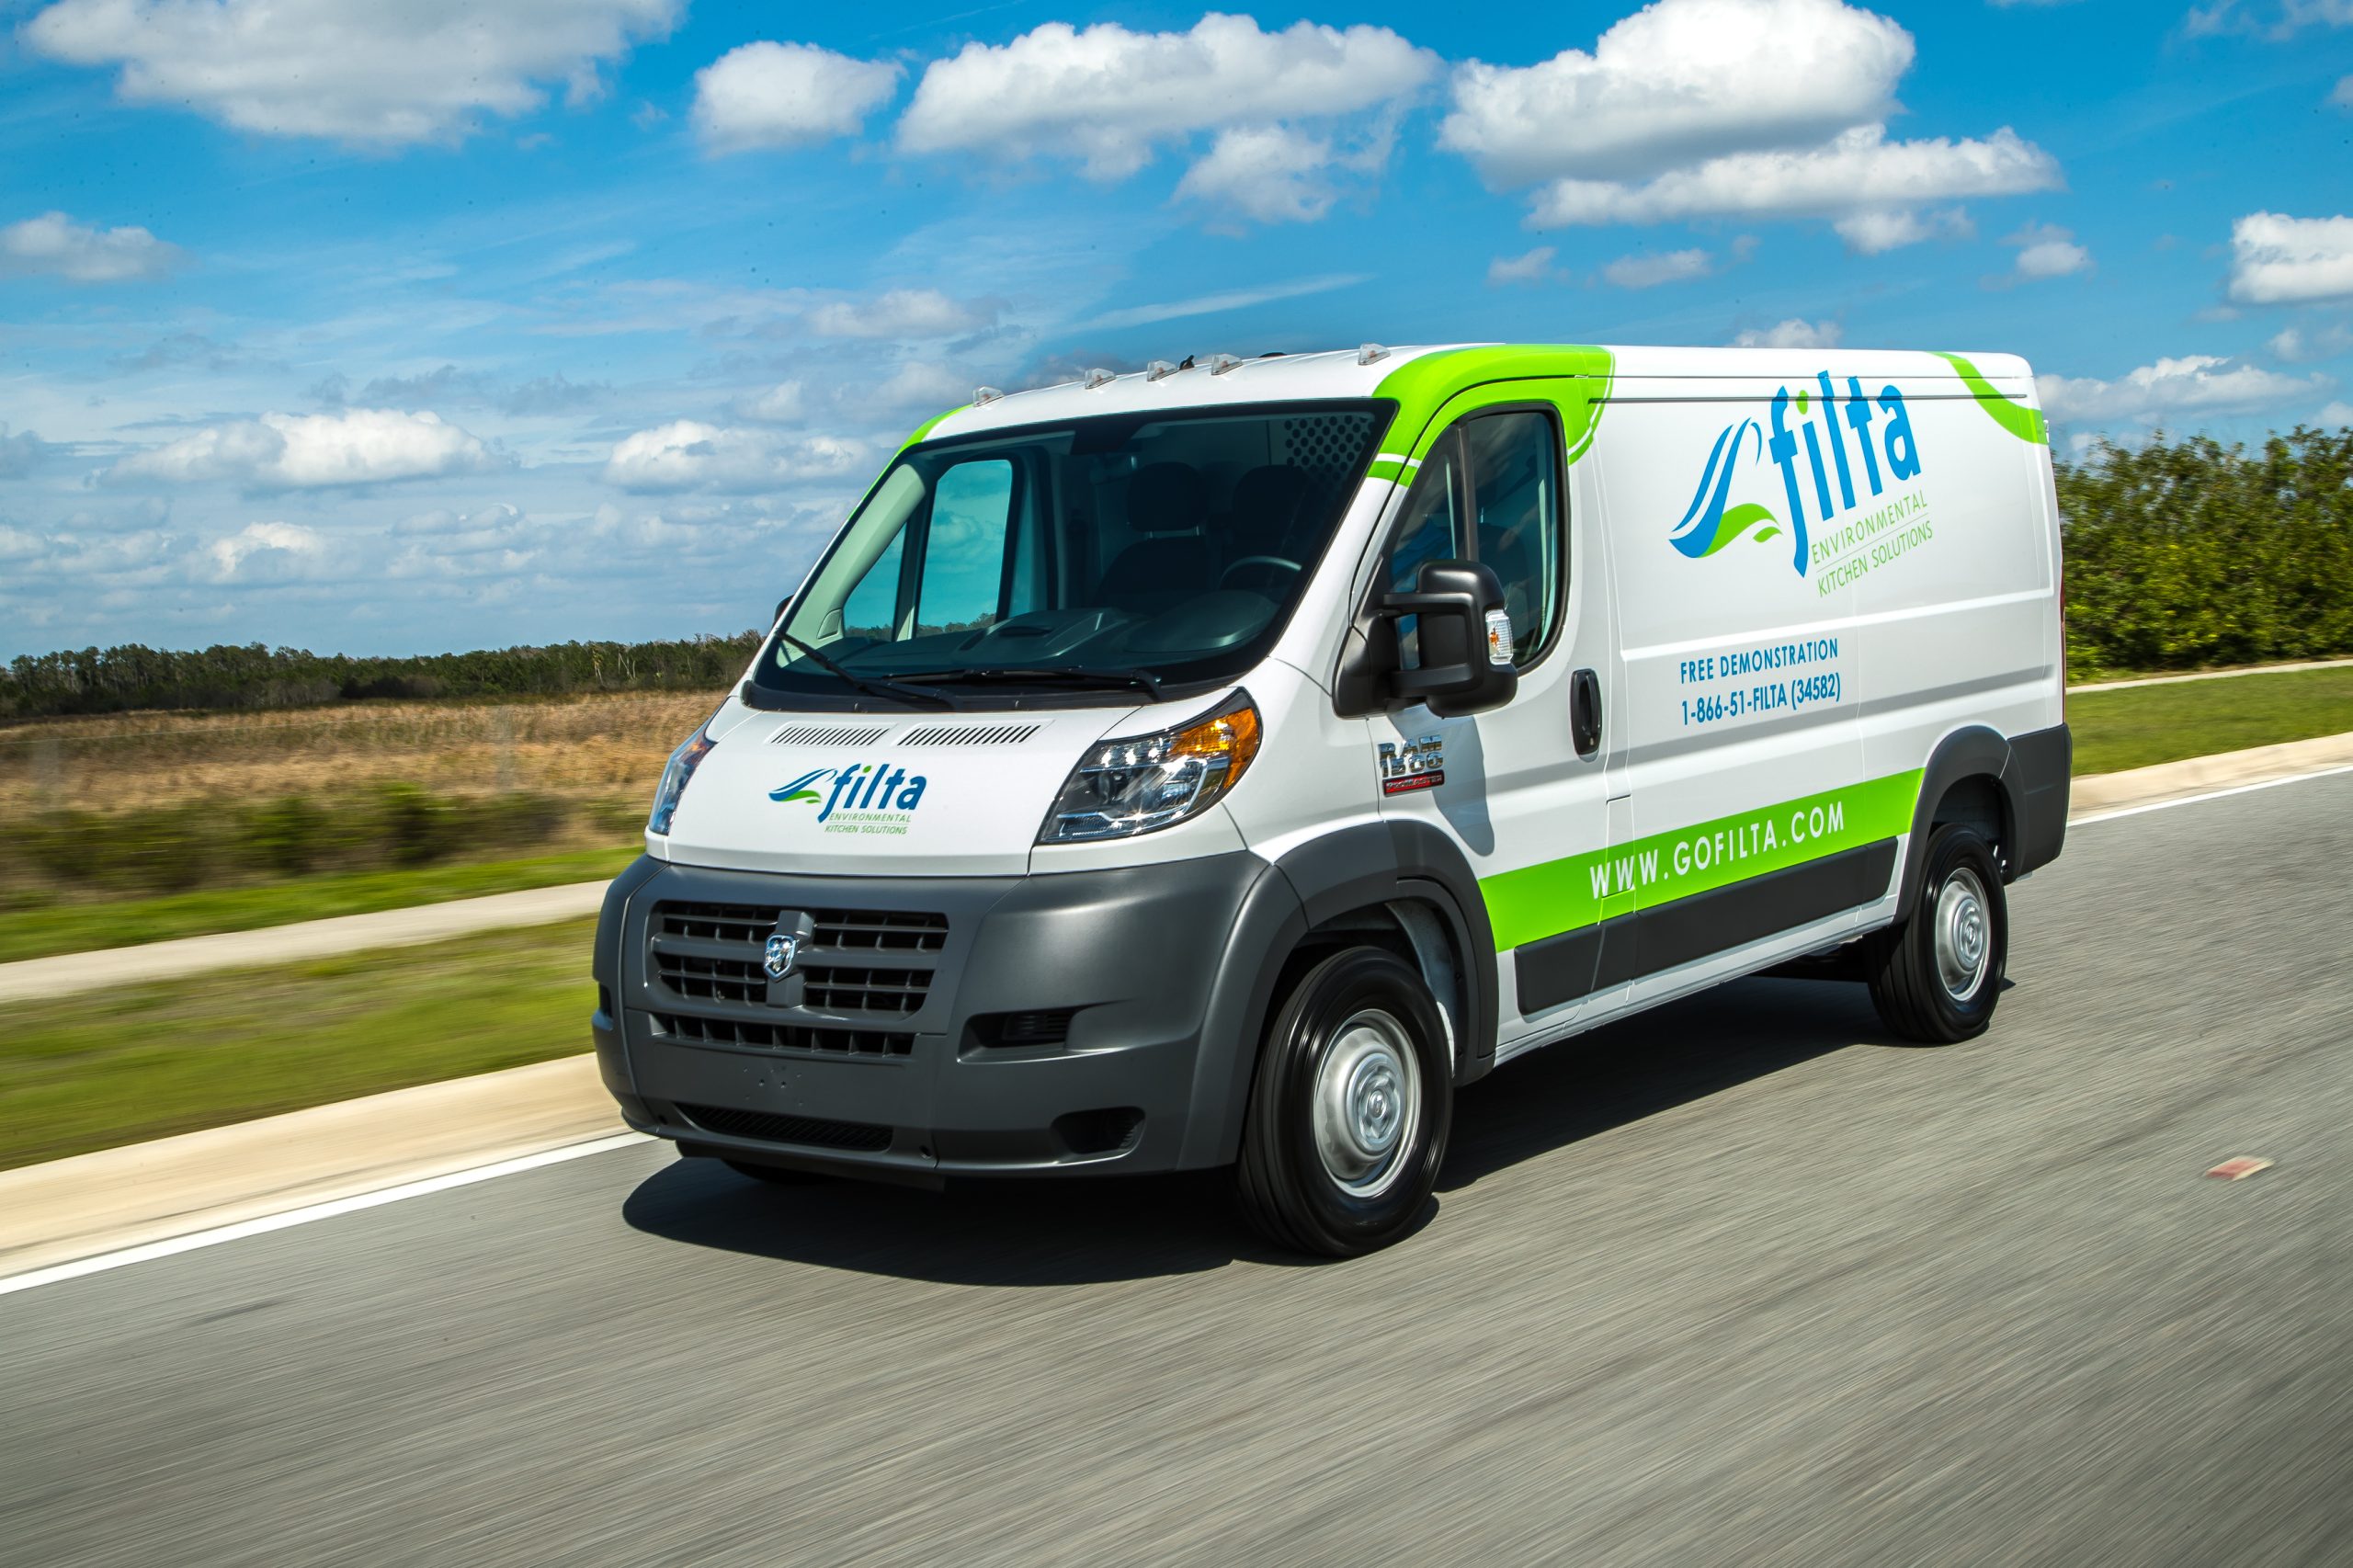 Filta branded van in motion on a street with a blue sky